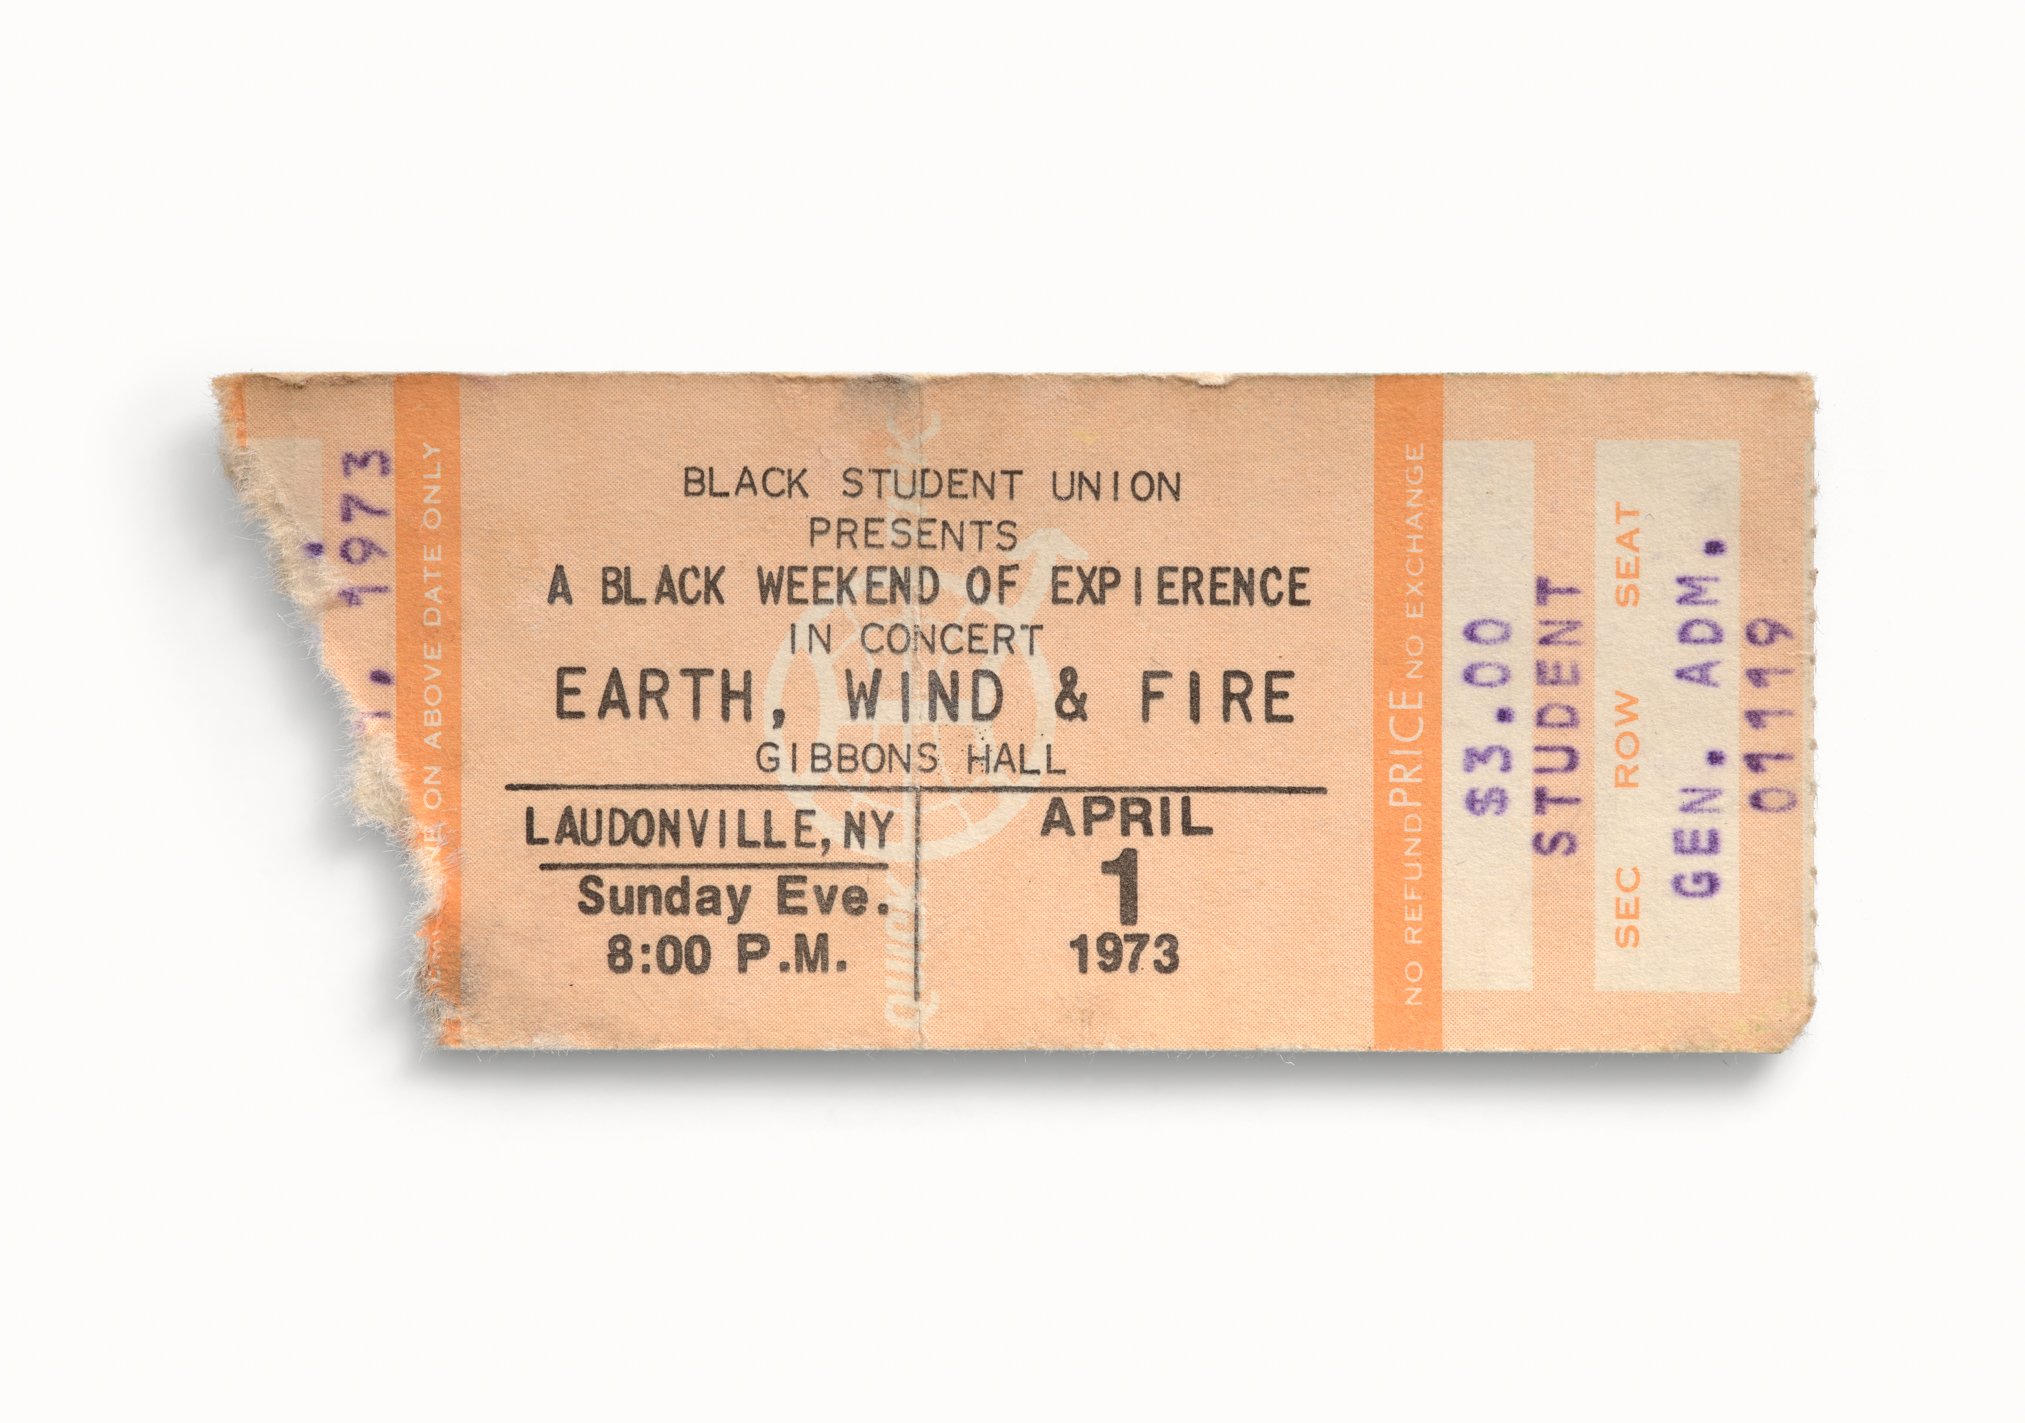 Earth, Wind & Fire, Gibbons Hall, Laudonville, NY 1973